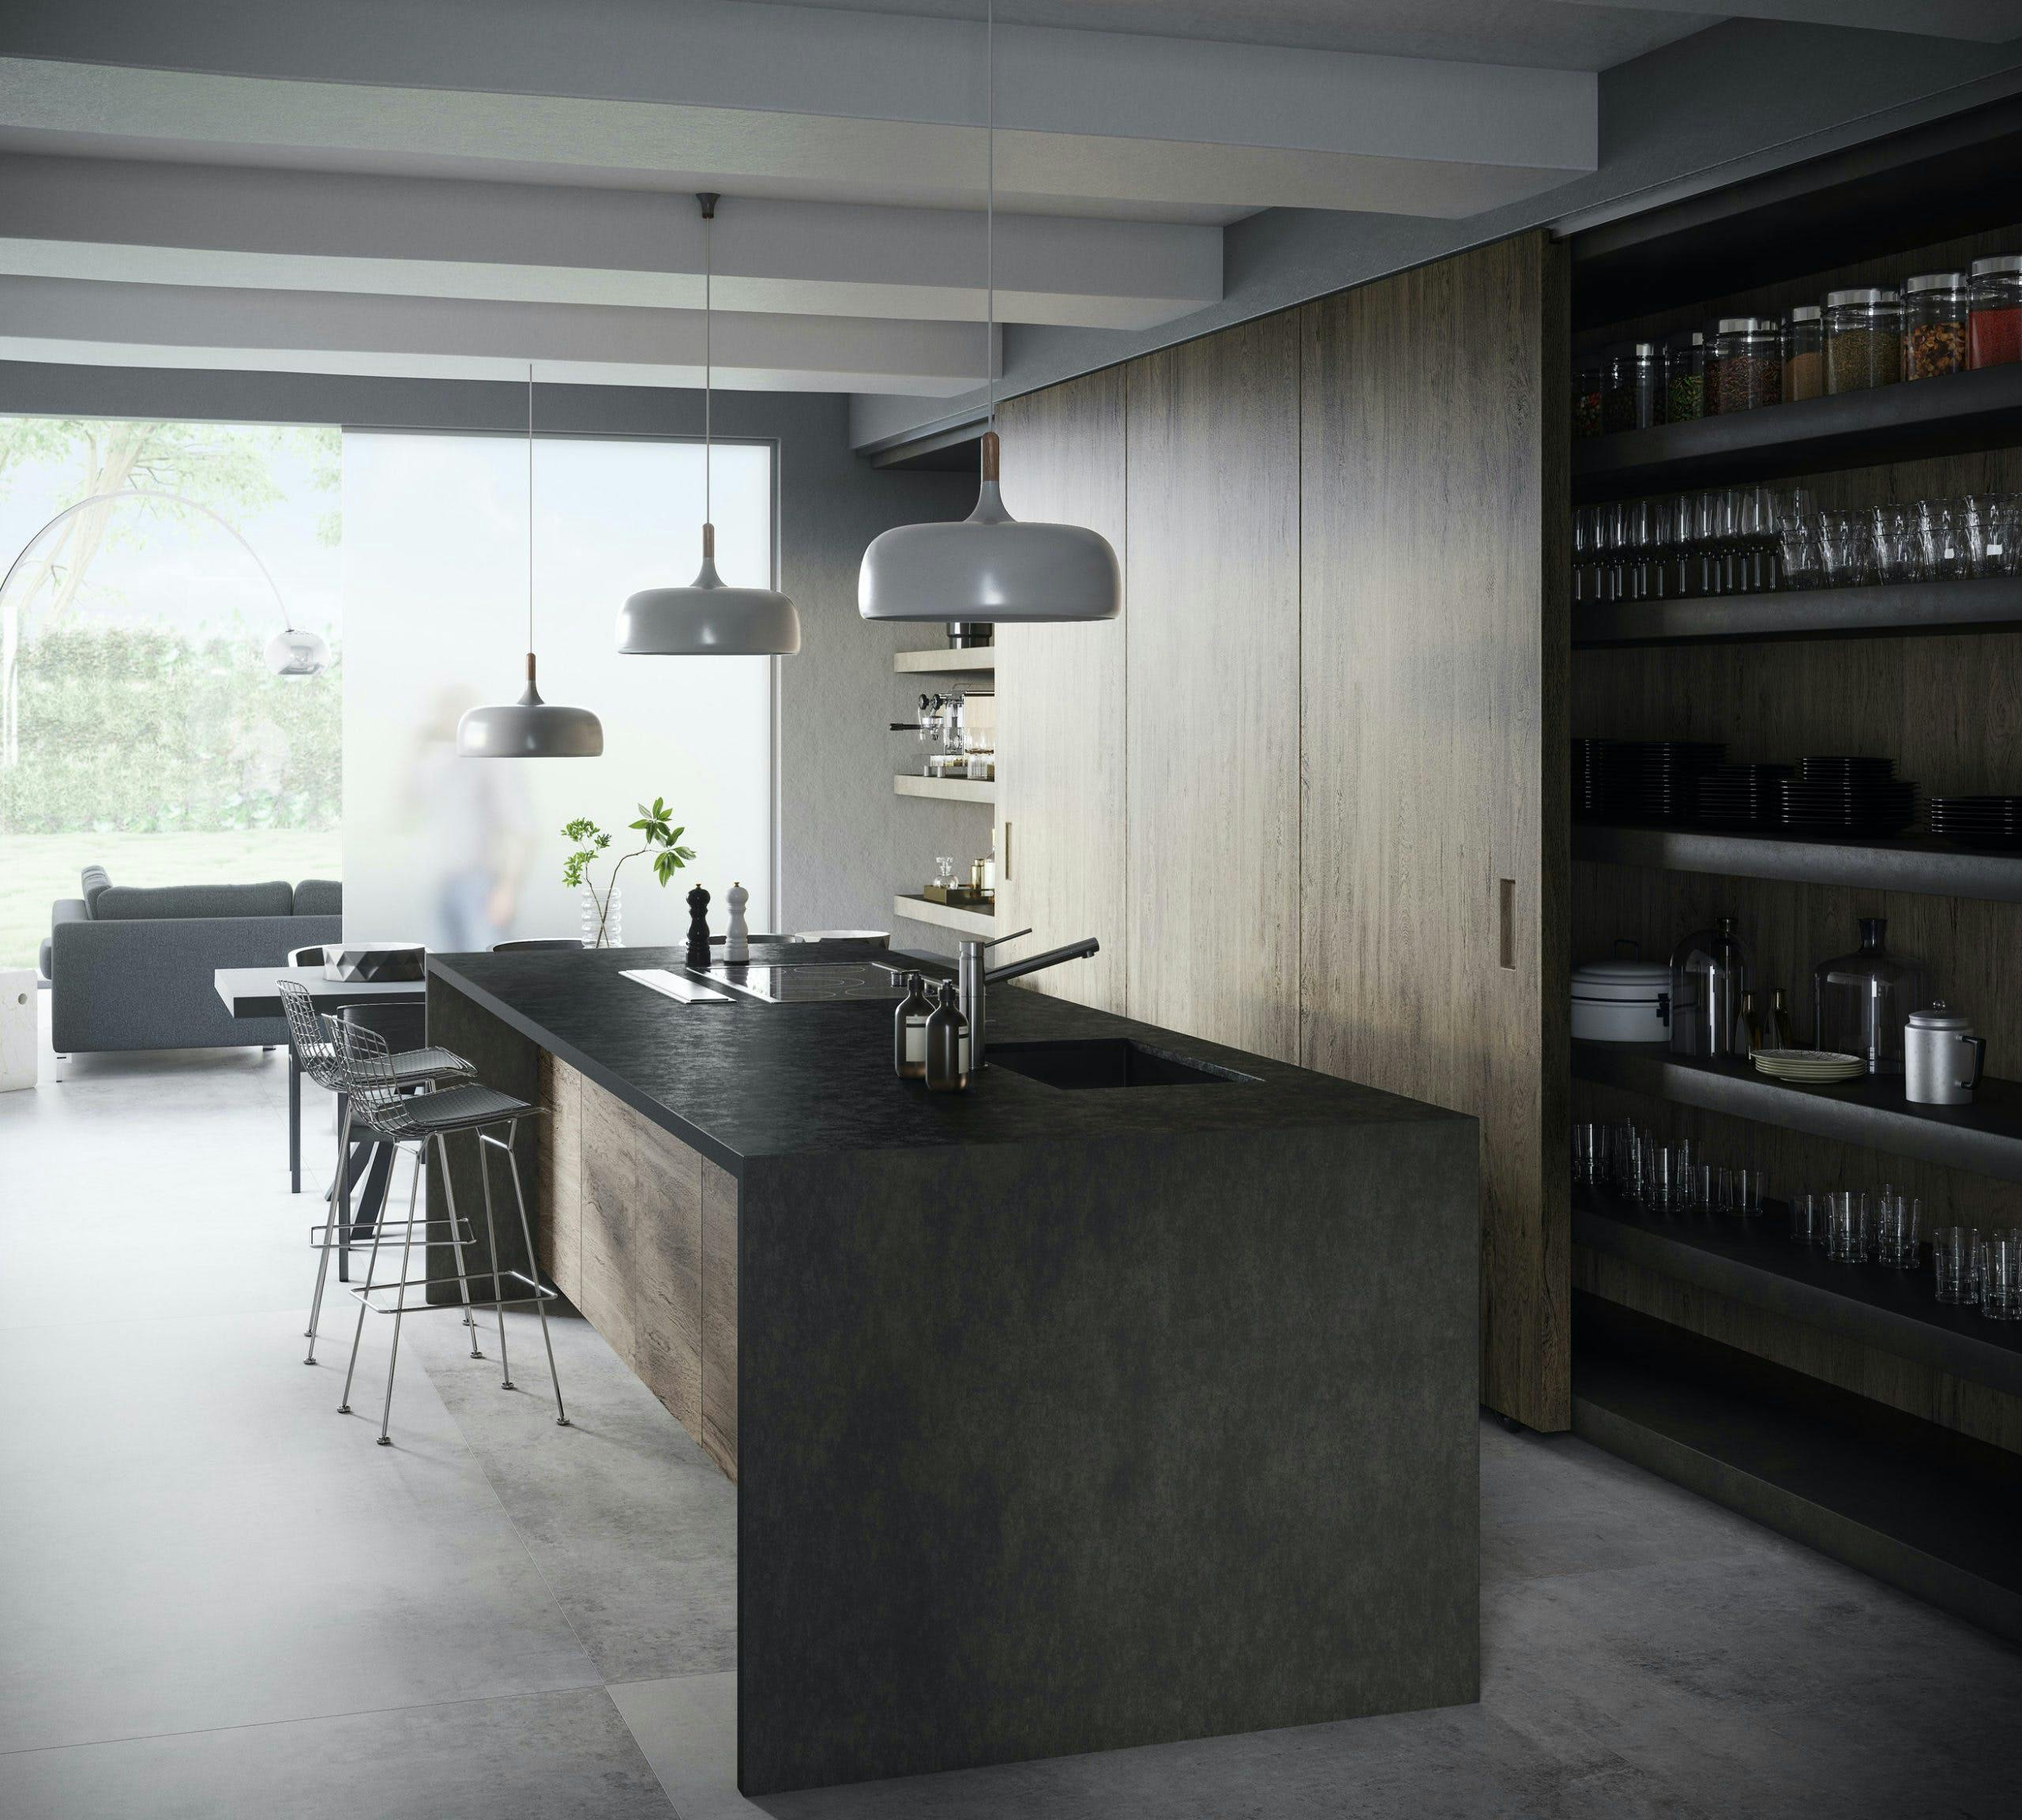 Image 32 of Dekton Kitchen Milar Resized 1 scaled 1 in How to organise your kitchen and keep it that way - Cosentino